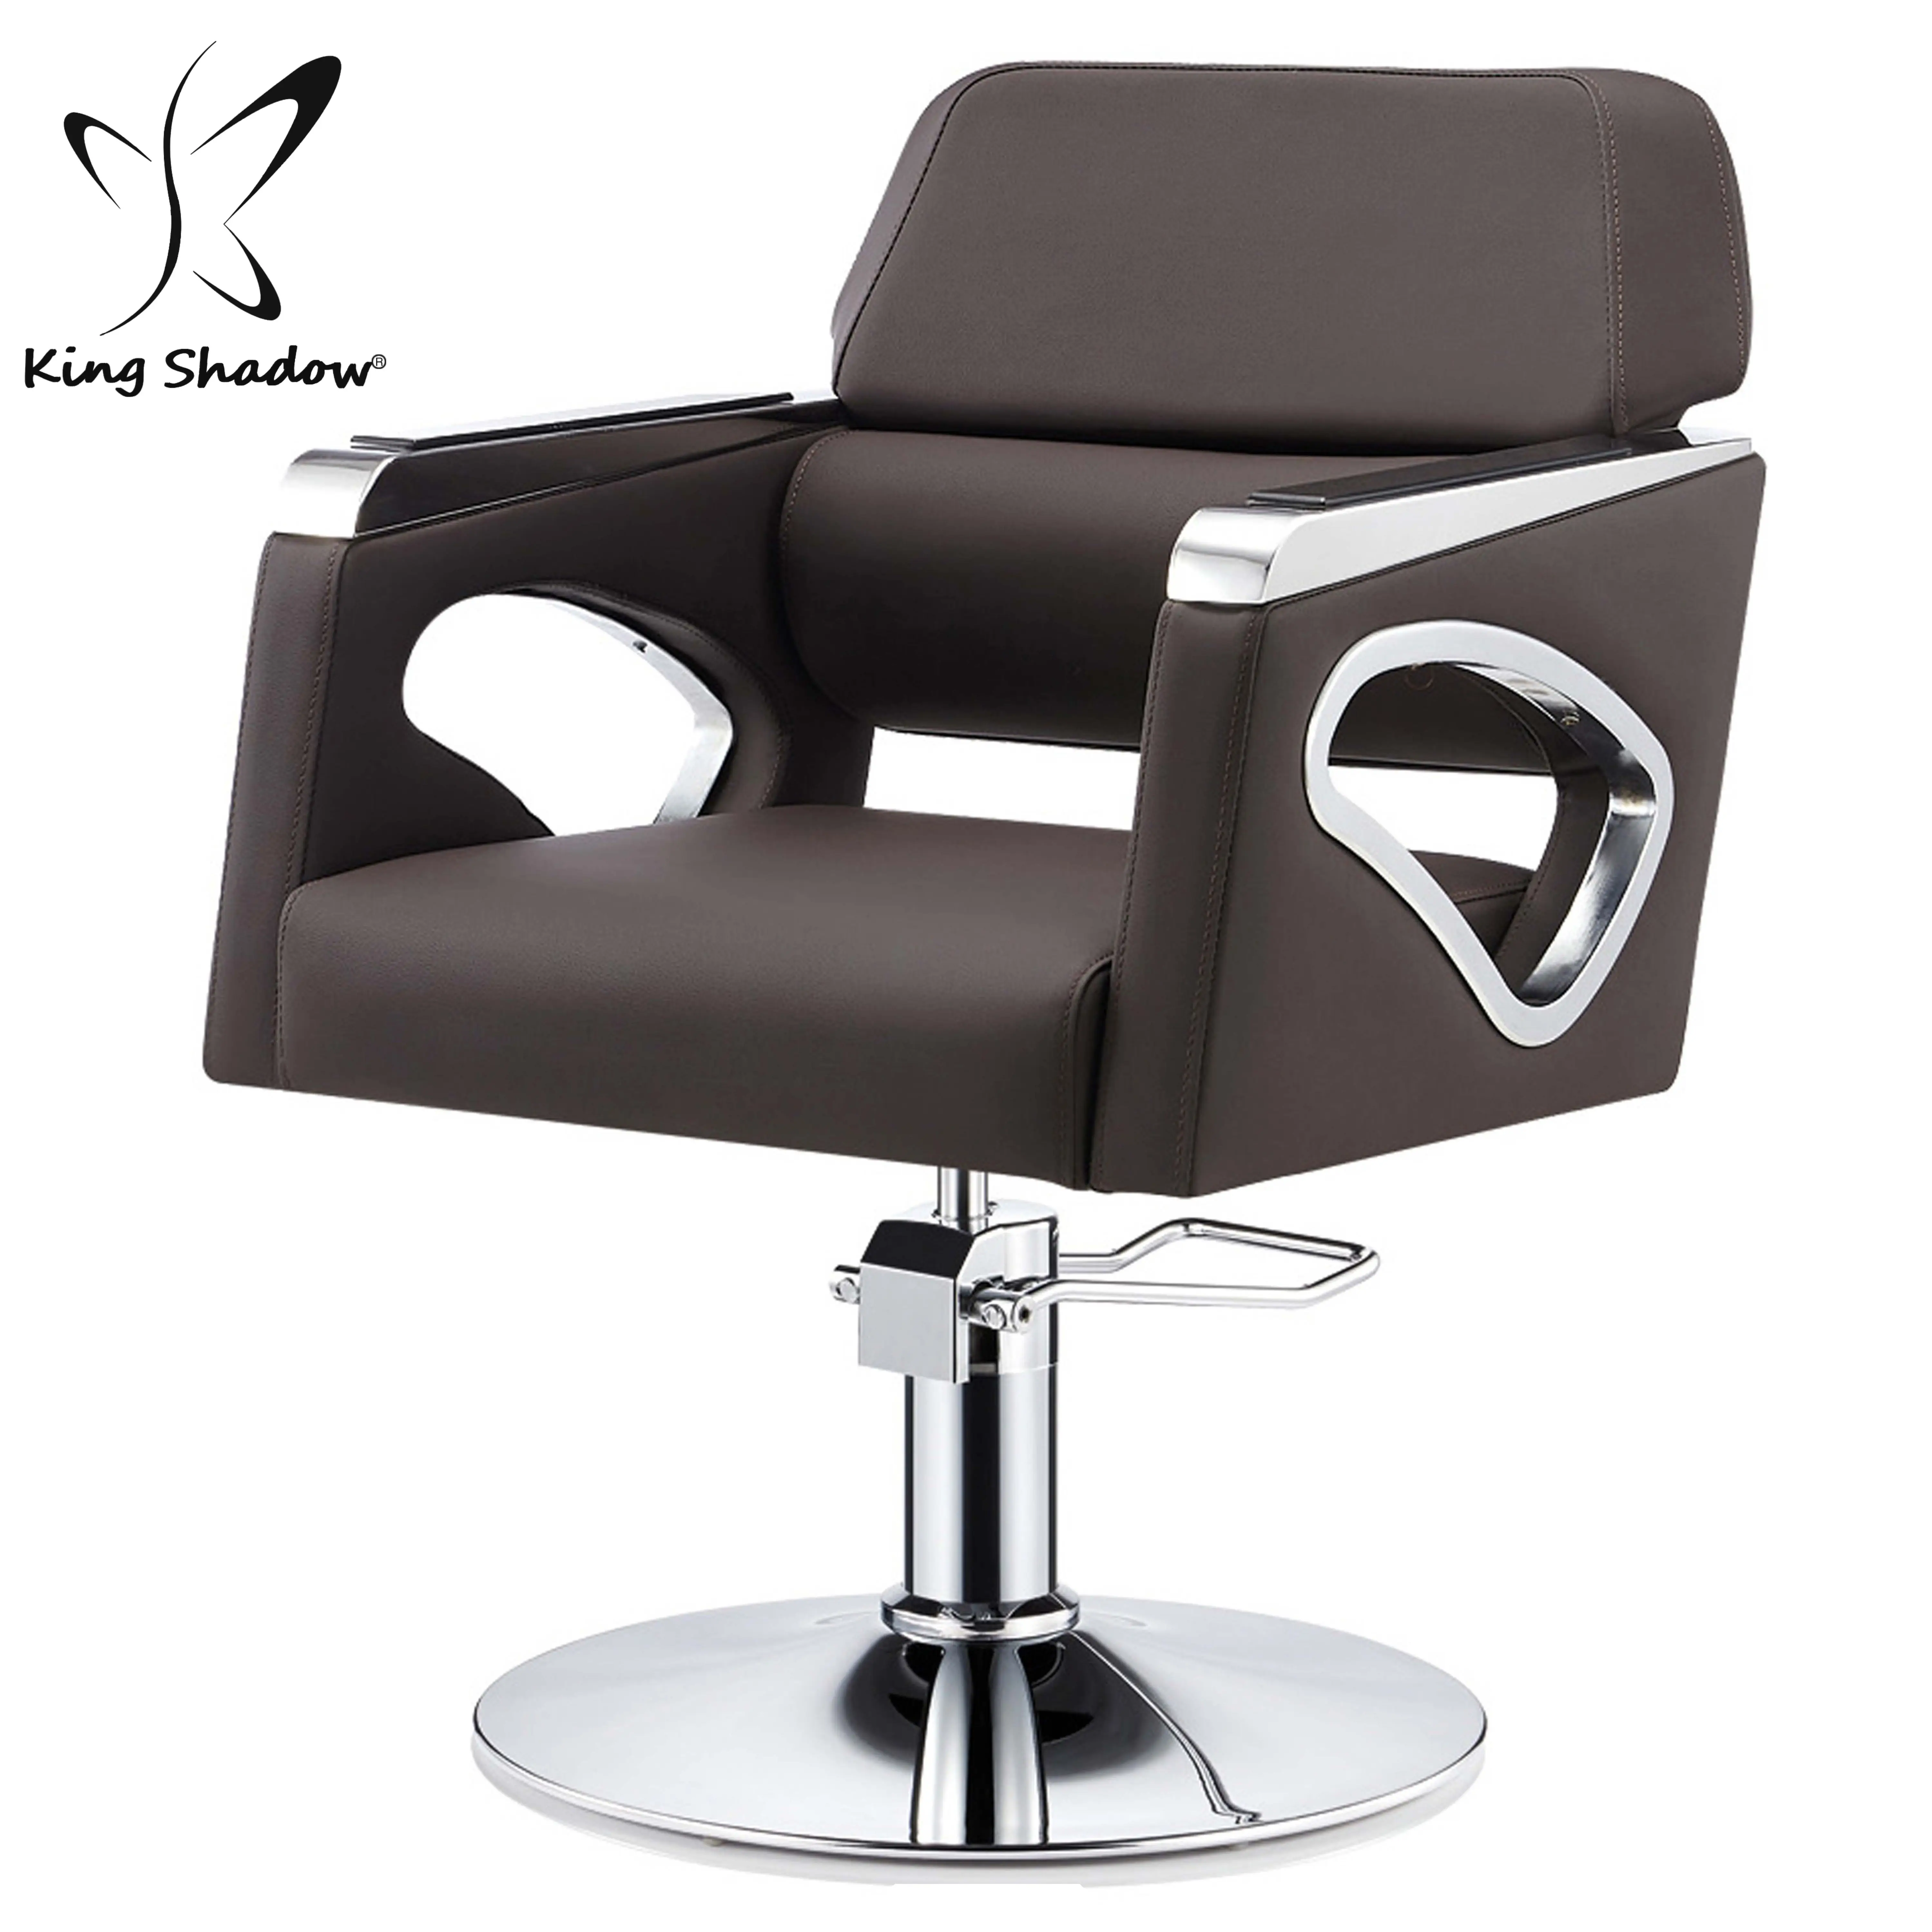 

Hot sale barber shop waiting chairs styling chairs from kingshadow, Optional